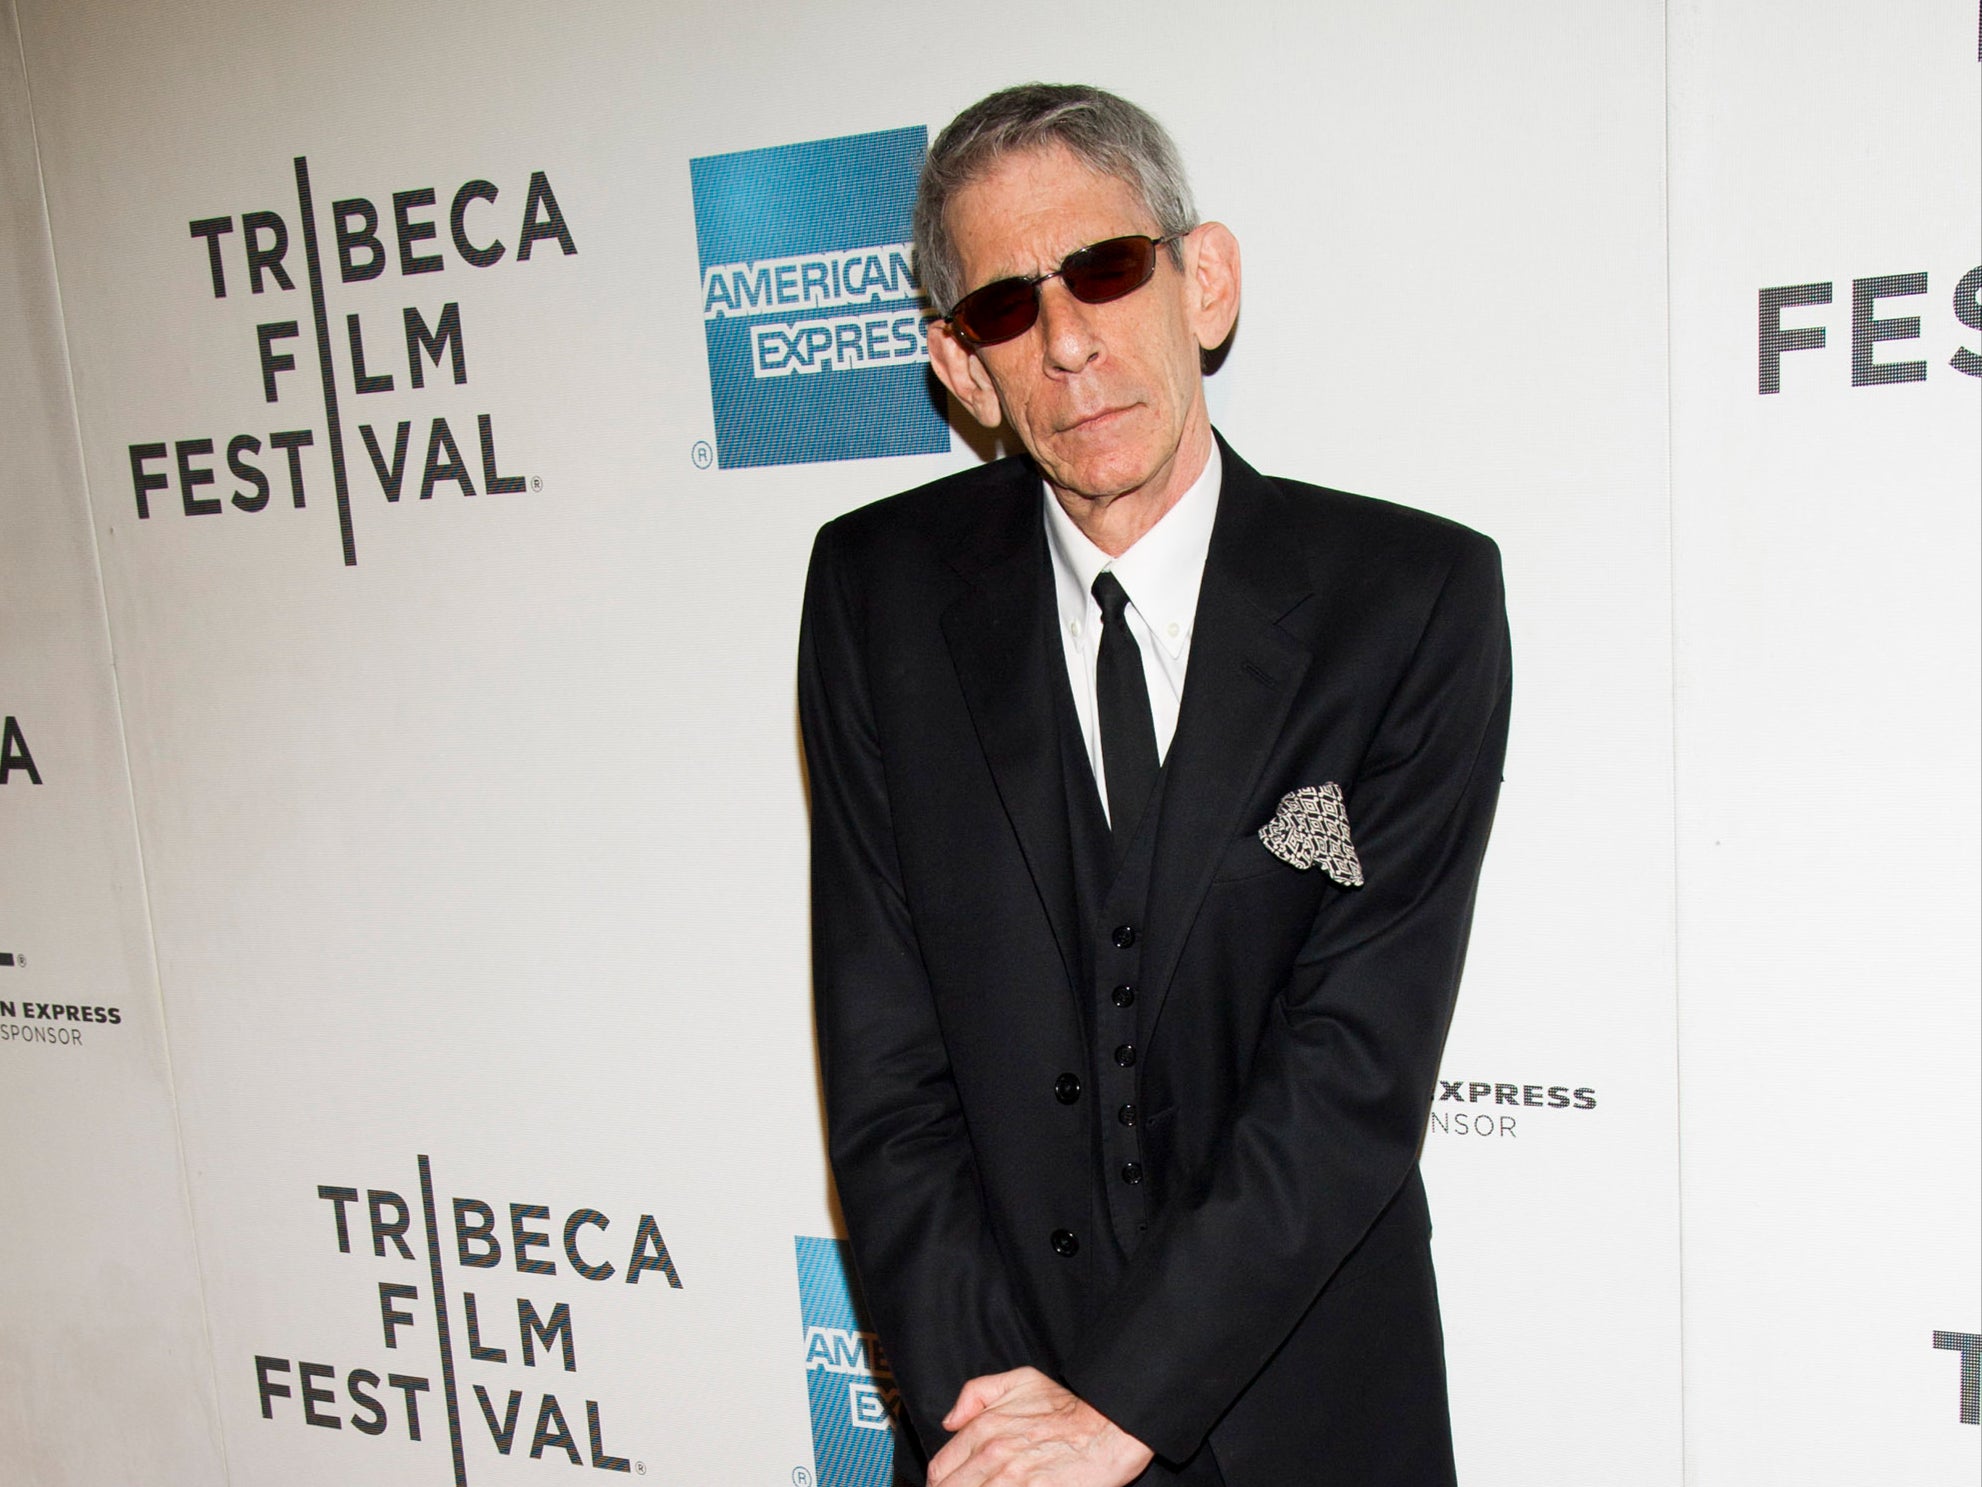 Richard Belzer attends the premiere of "Mistaken For Strangers" during the opening night of the 2013 Tribeca Film Festival on Wednesday April 17, 2013 in New York.